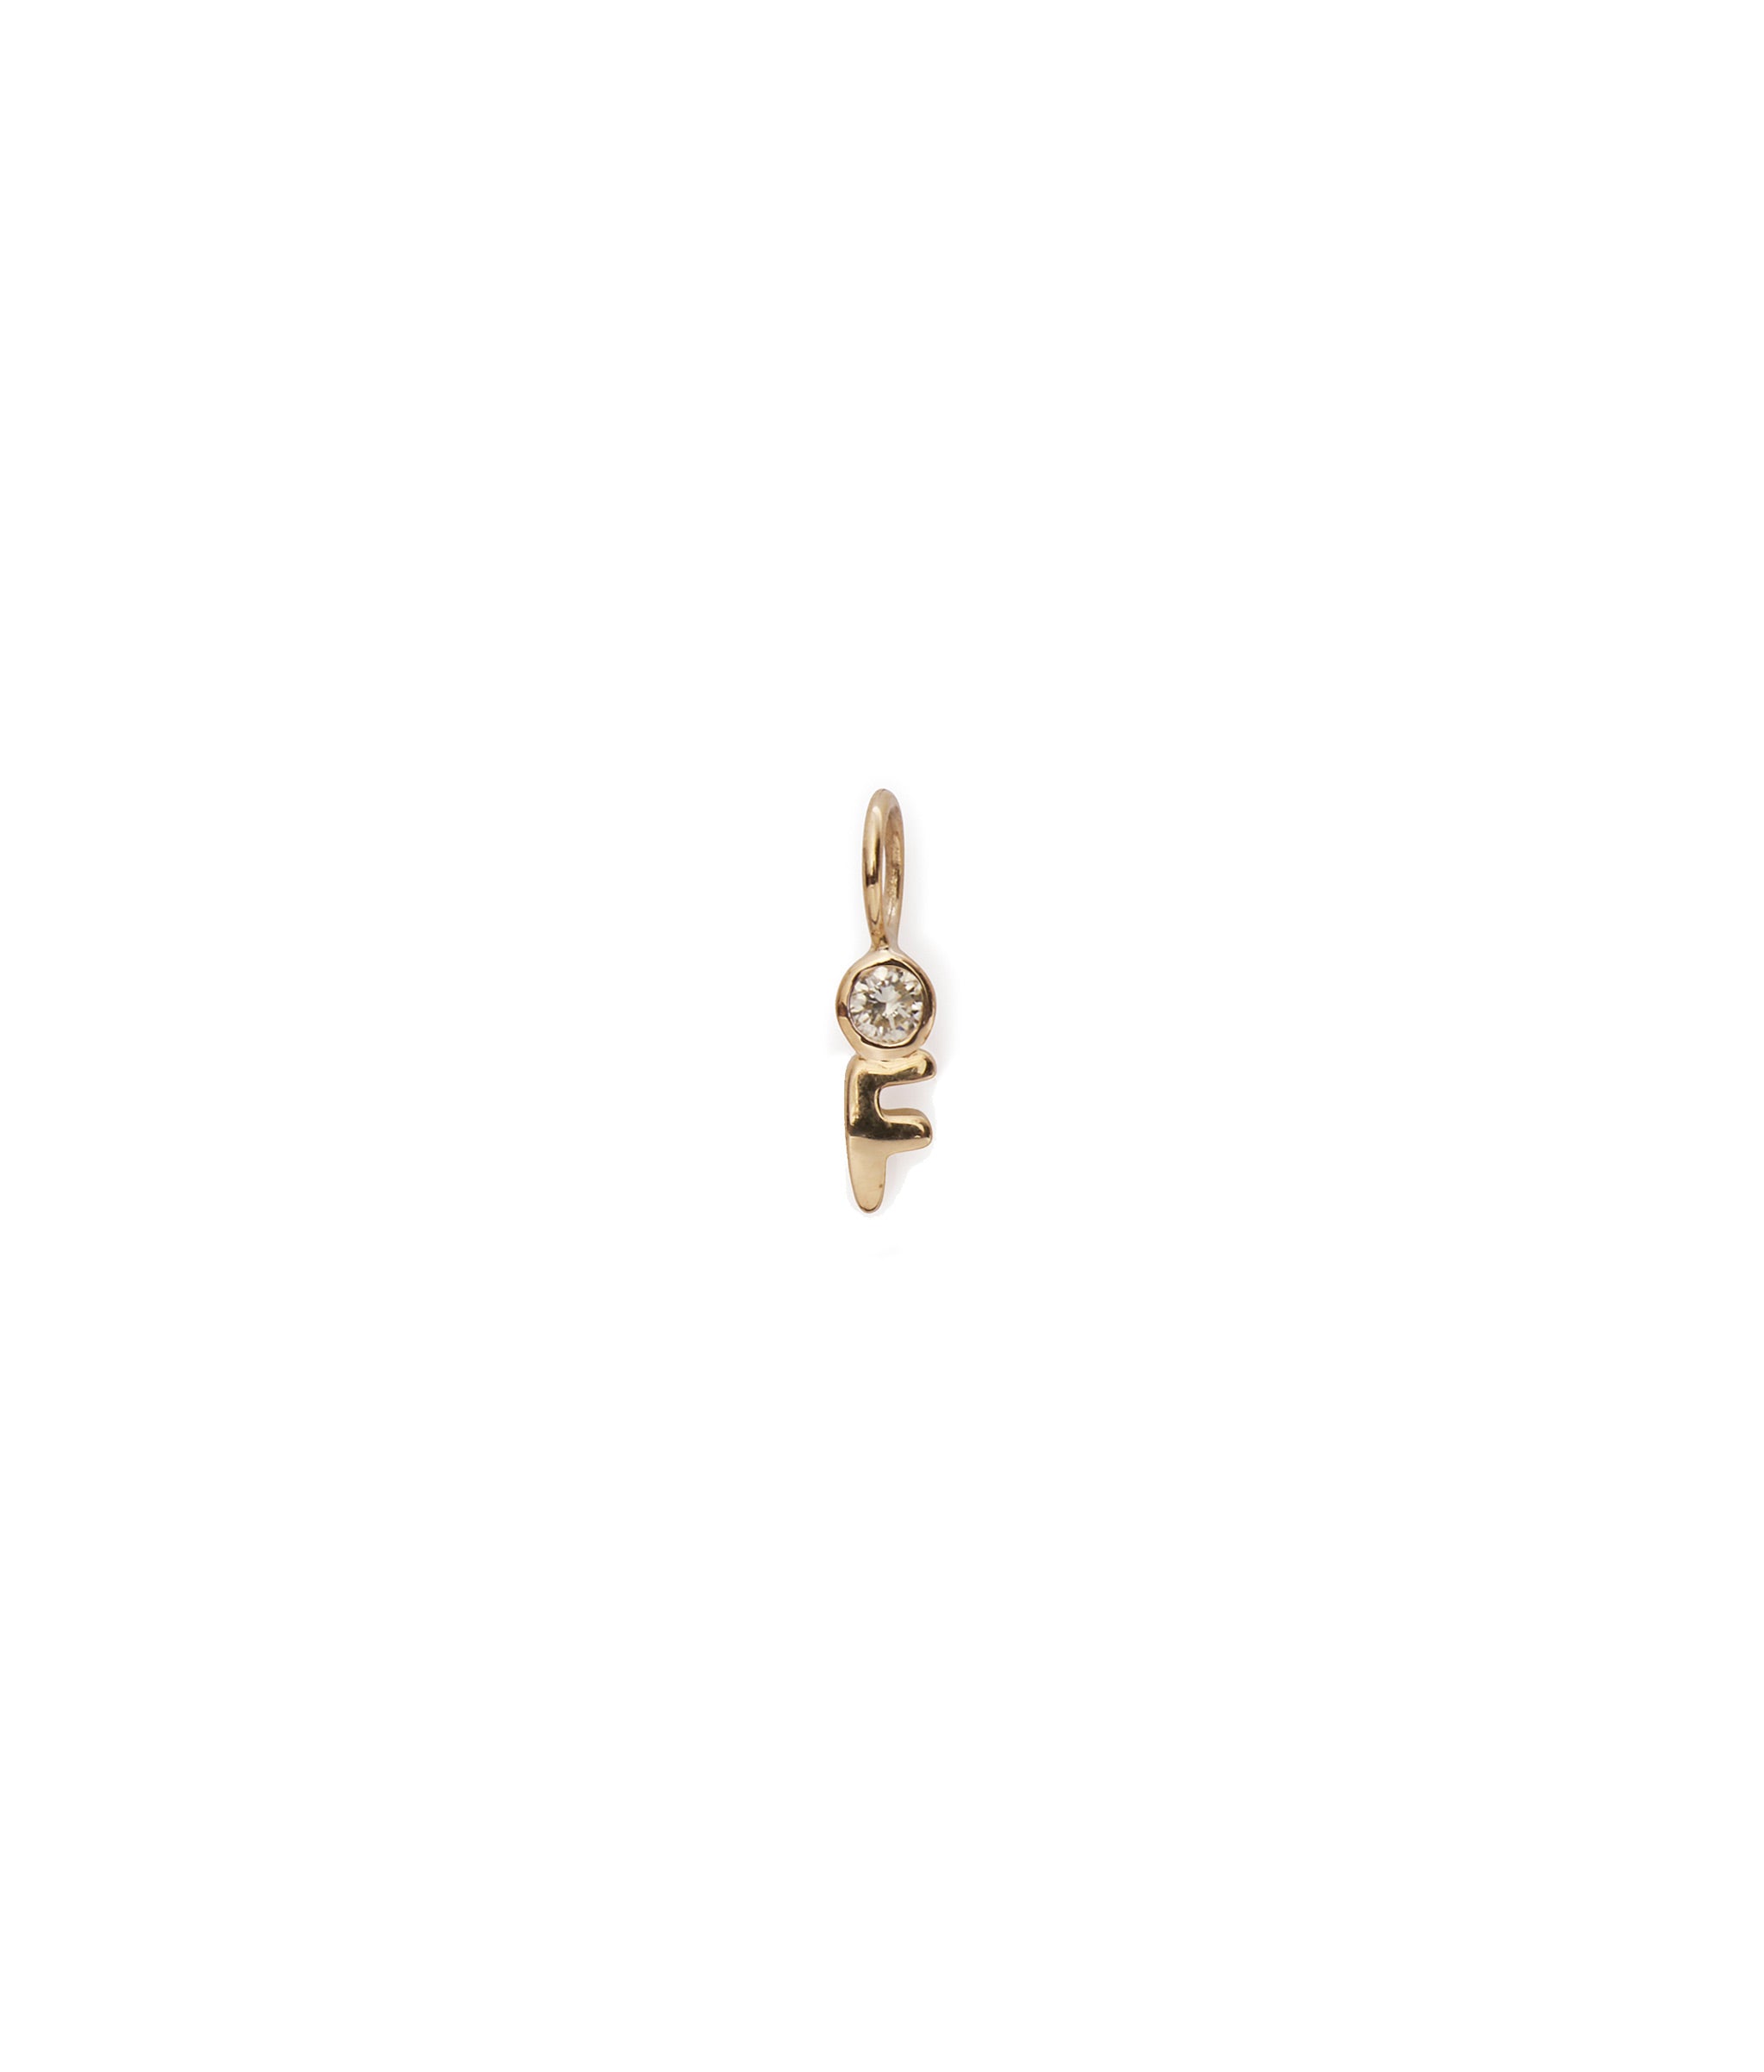 Alphabet Soup "F" Charm. Puffy mini 14k gold letter "F" charm with round diamond accent.